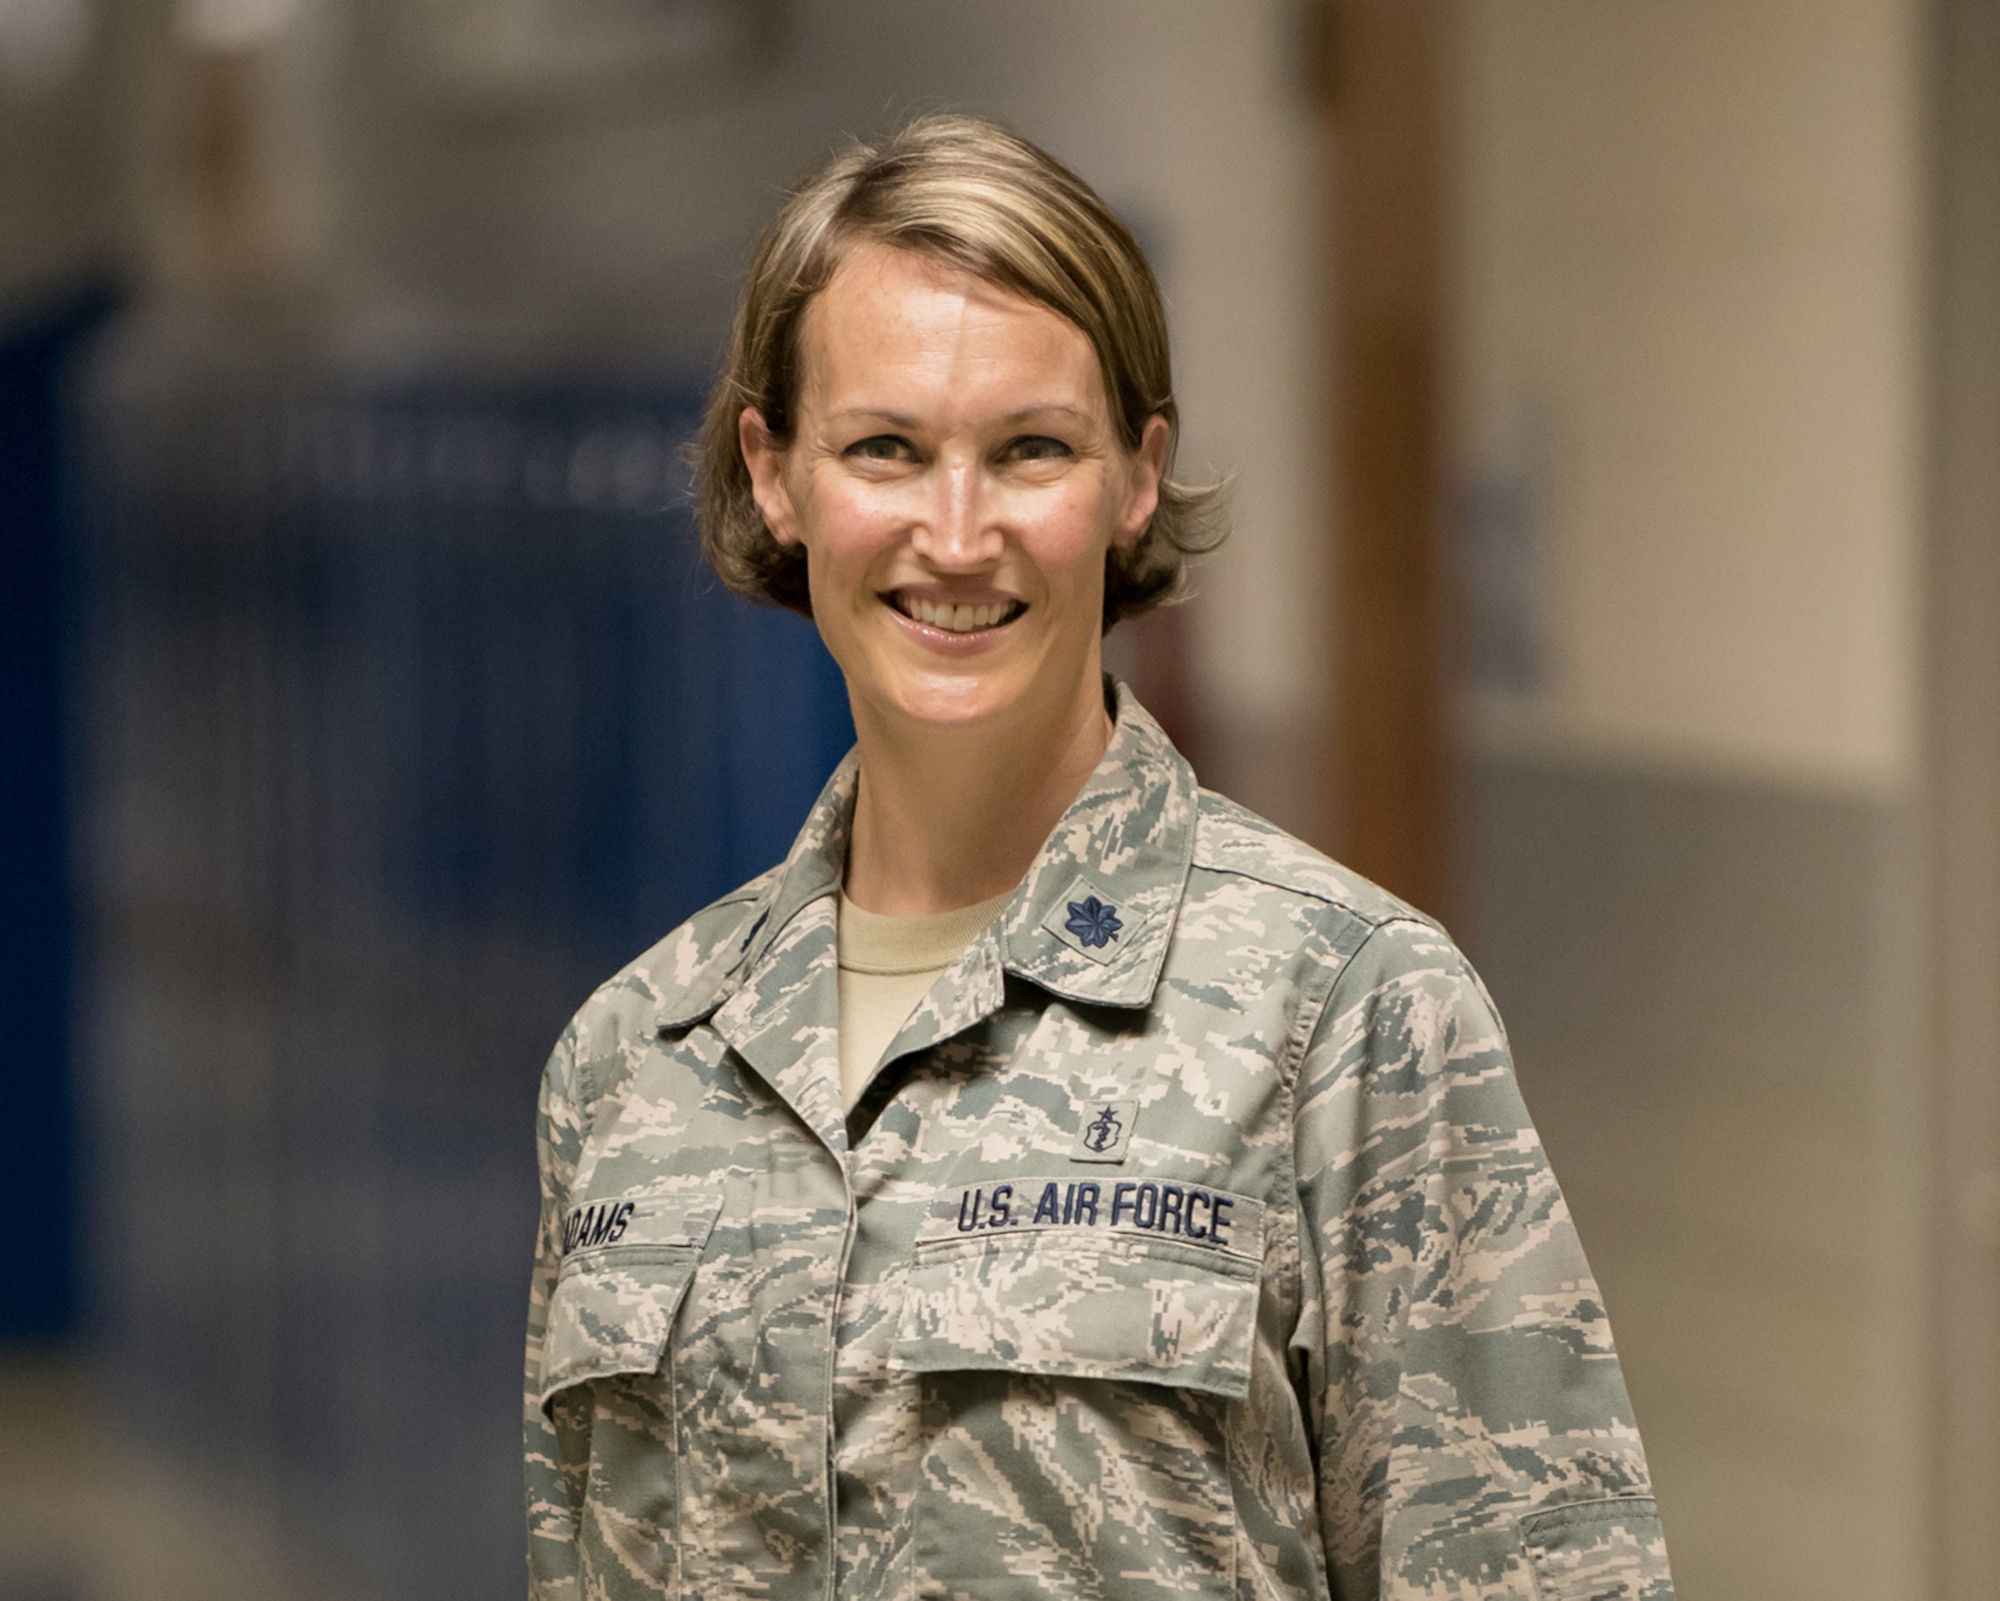 Lt. Col. Patricia Adams, an optometrist in the Kentucky Air National Guard’s 123rd Medical Group, has earned the 2019 General John Hunt Morgan Award from the National Guard Association of Kentucky. The award recognizes Adams’ outstanding service as a clinical site leader during an Innovative Readiness Training exercise in Eastern Kentucky in 2018, during which military personnel provided no-cost medical care to thousands of underserved residents, performing more than 11,000 procedures and delivering 1,400 prescription eyeglasses with a market value of more than $1 million. (U.S. Air National Guard photo by Lt. Col. Dale Greer)